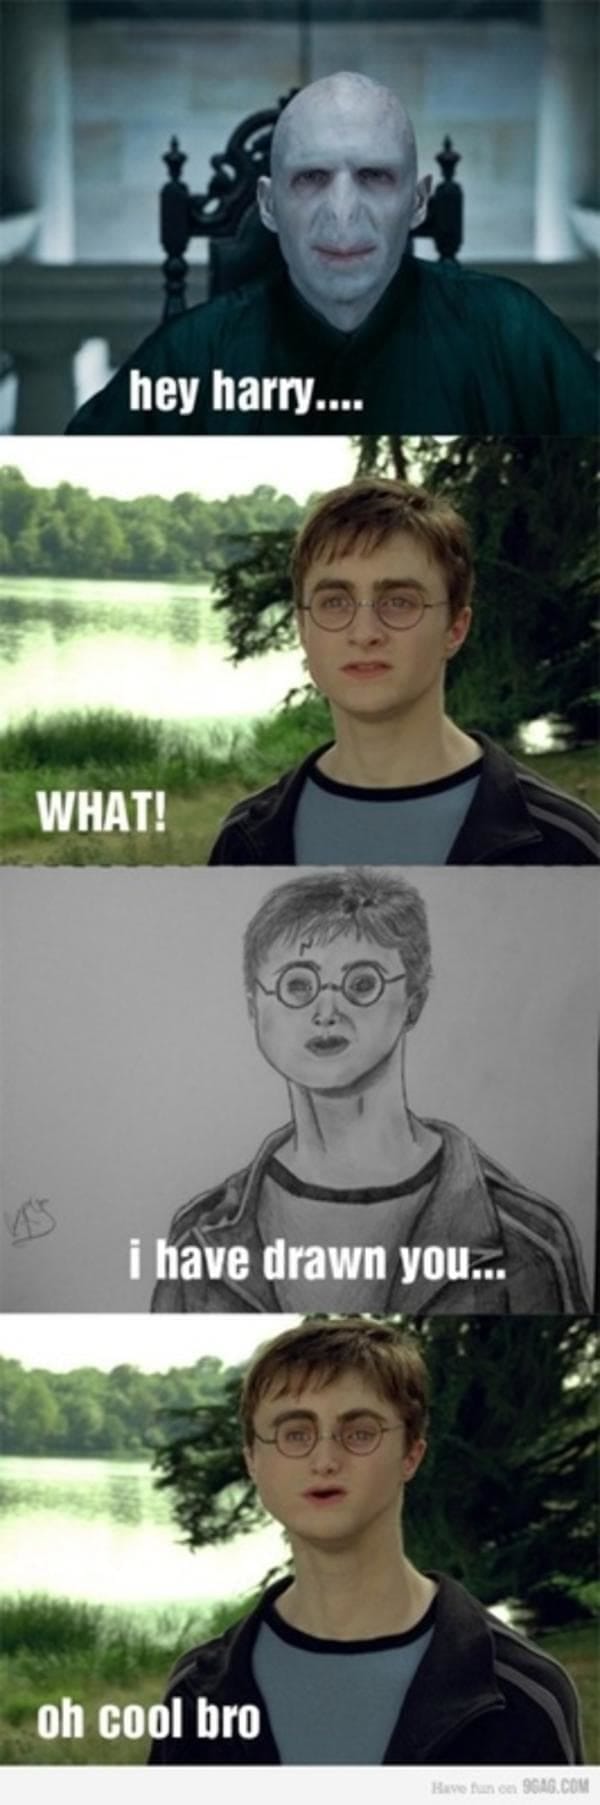 21 Instances Of "If Celebrities Looked Like The Horrid Fan-made Sketches Of Them"